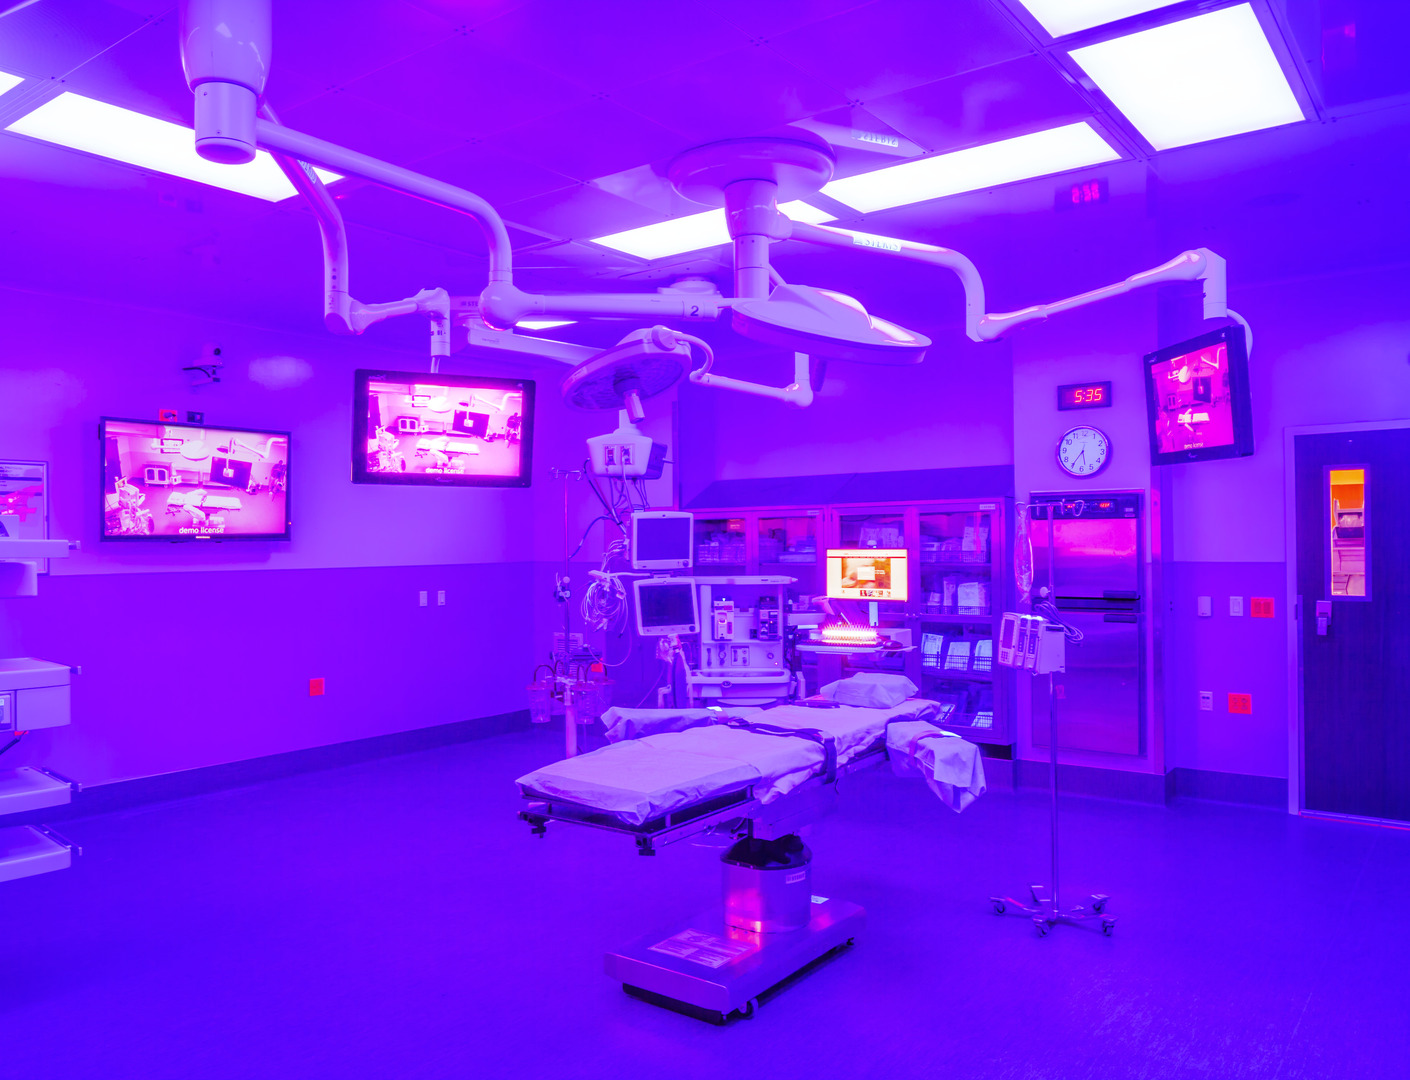 Thoughtful use of air ventilation can reduce the spread of infectious disease within hospitals.